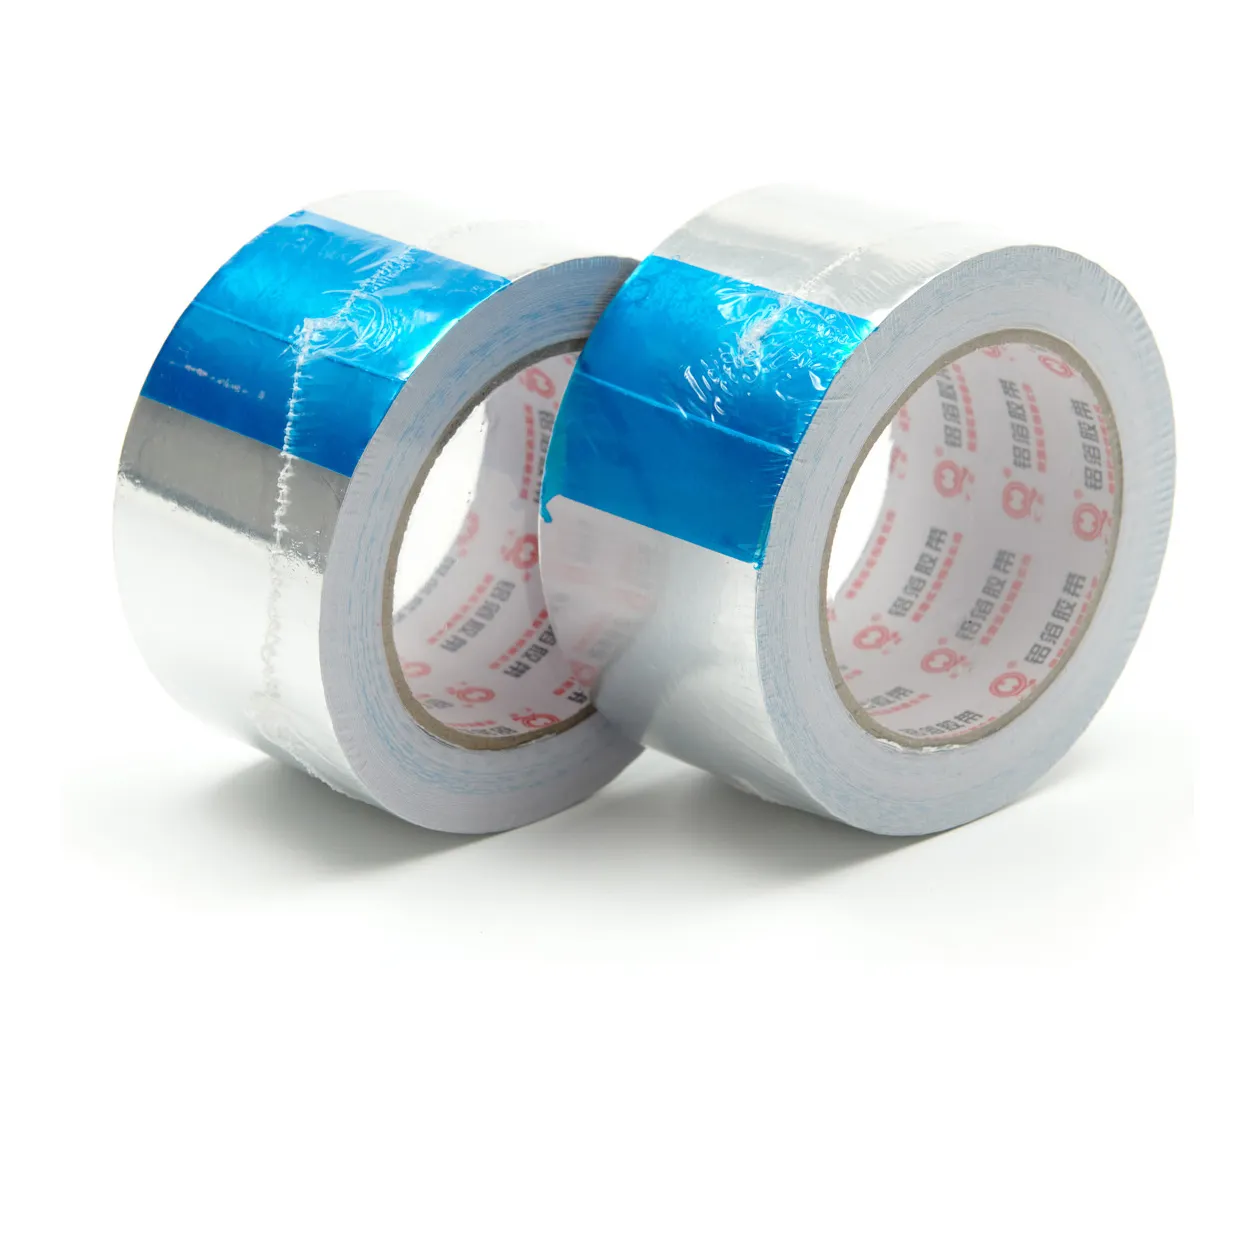 Air Conditioning Insulation Aluminum Tape Jumbo Roll UL 723 Approval Fireproof Aluminum Foil Duct Tape